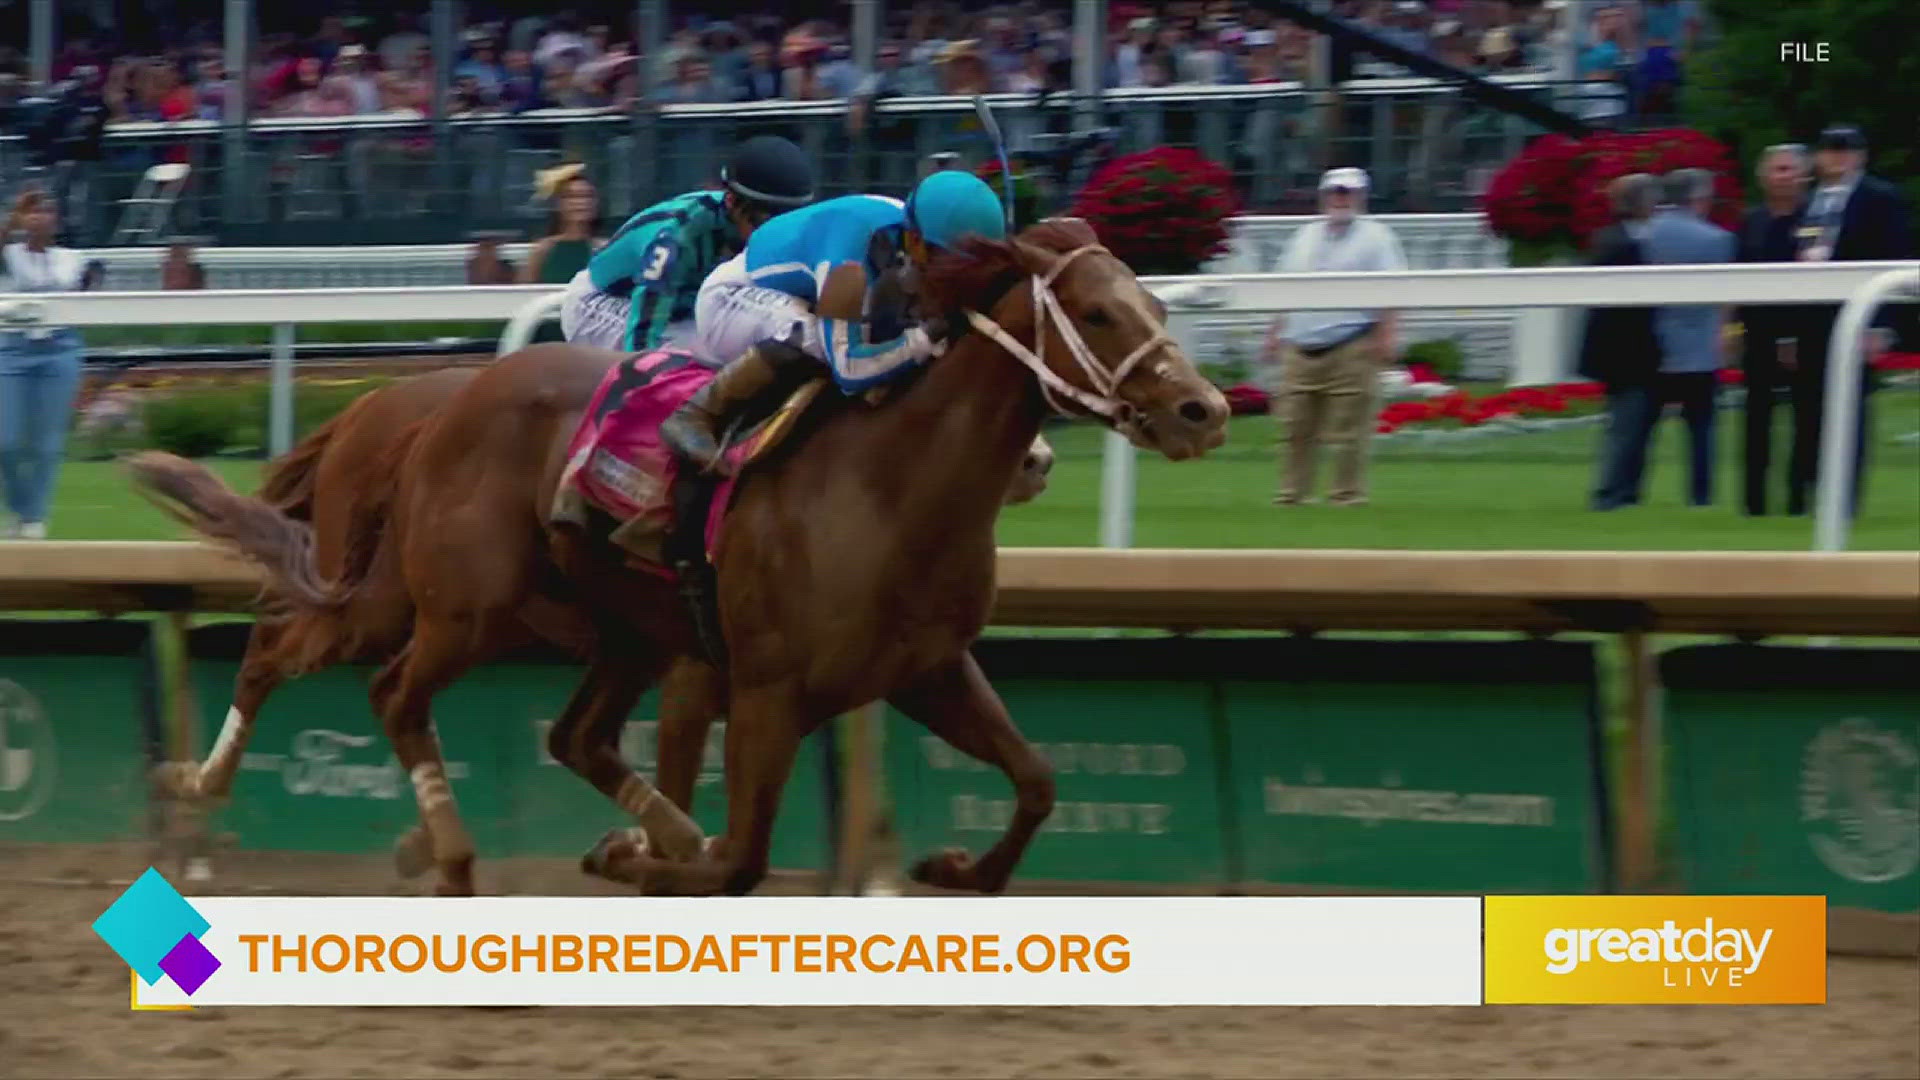 Thoroughbred Aftercare Alliance provides accreditation to aftercare organizations so they can retire, retrain, and rehome racehorses.